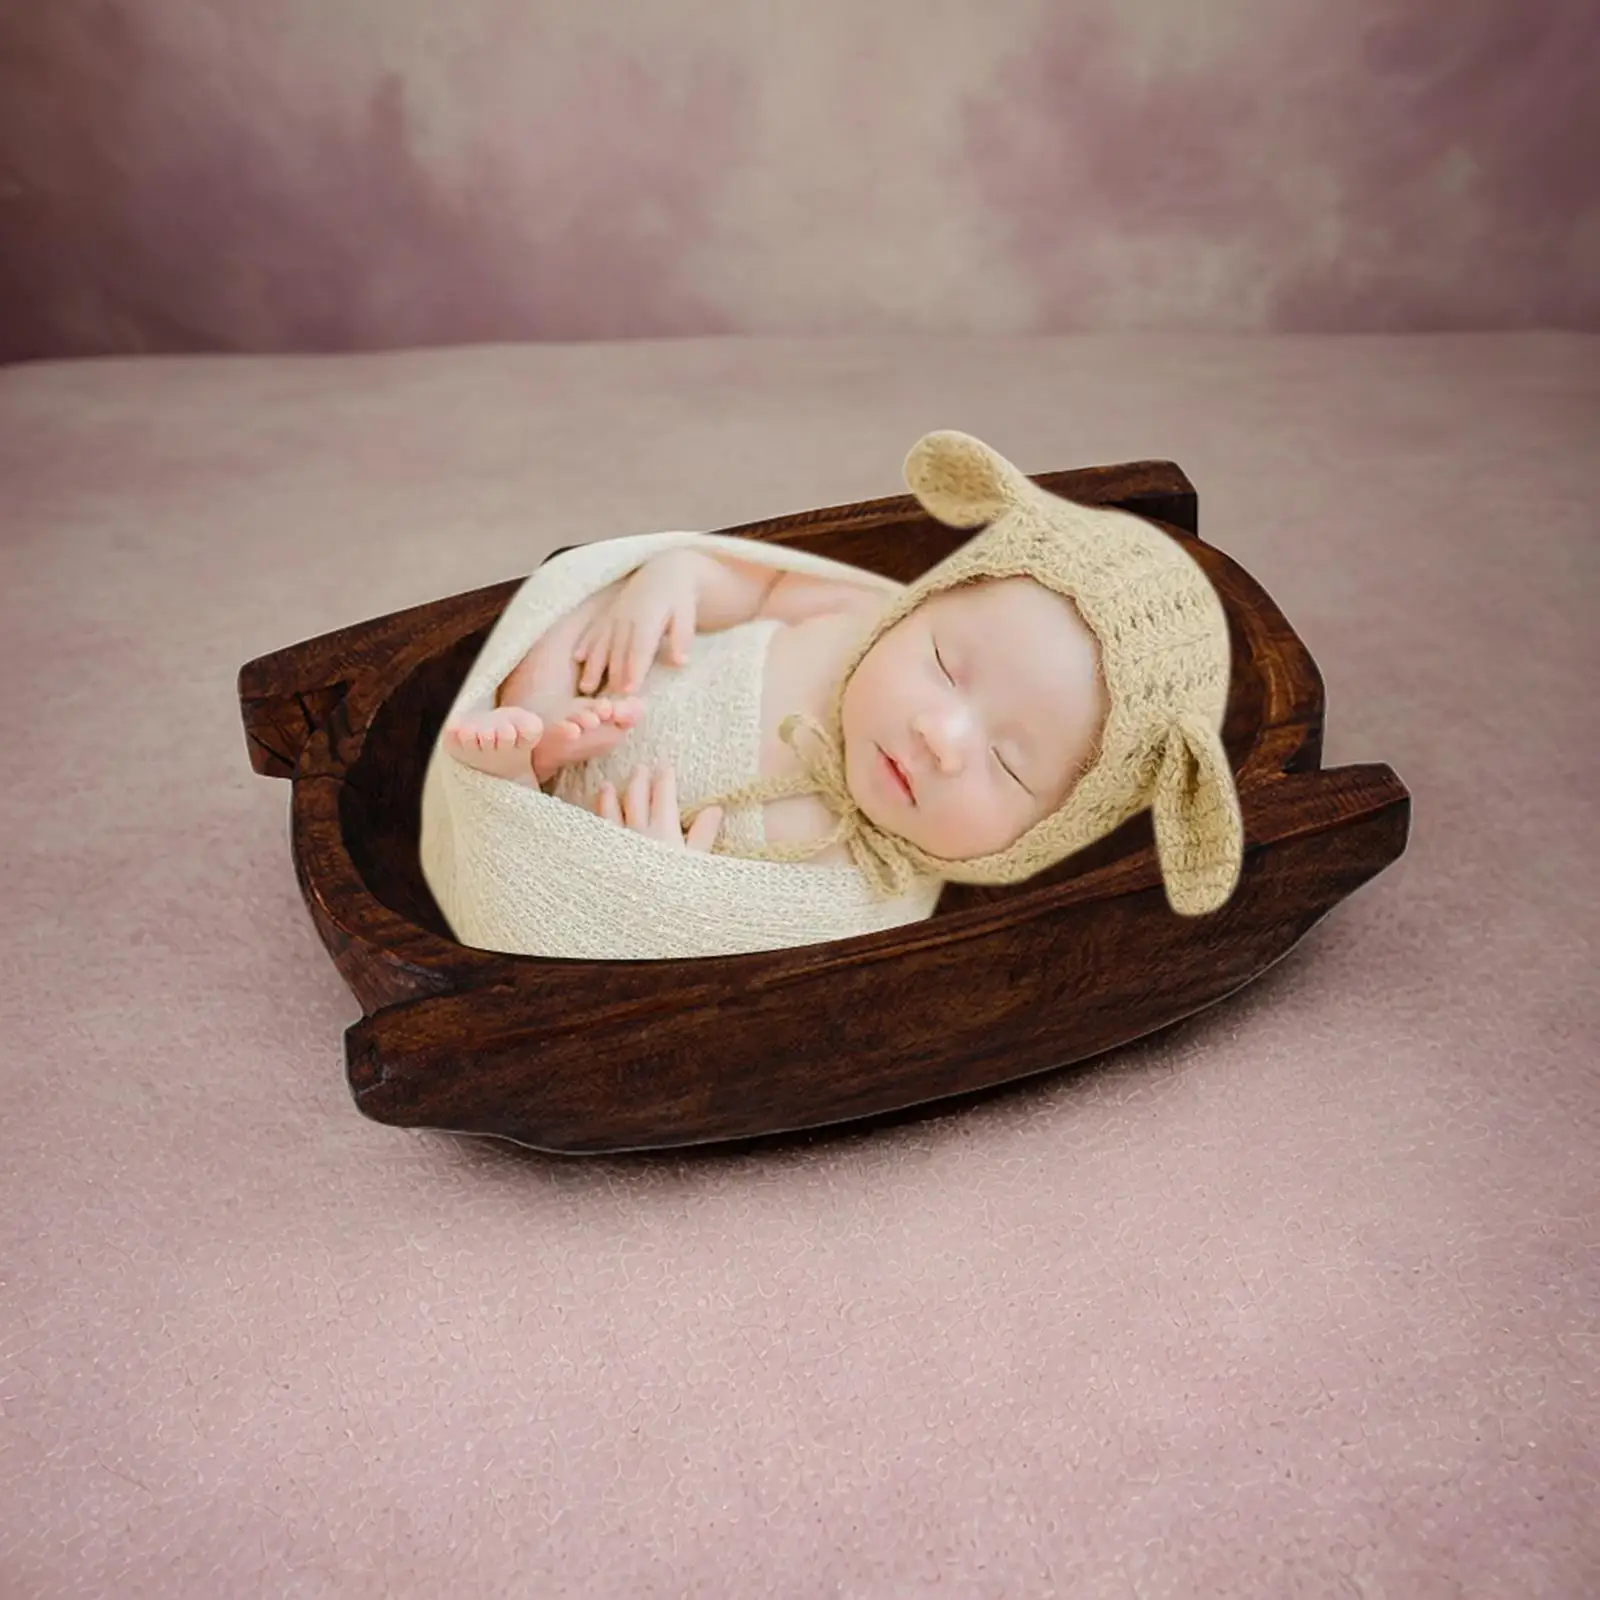 Baby Photography Prop Decor Wooden Bowl Small Couch Accessory Seat Bed for Monthly Baby Baby Girls Boys Newborn Birthday Decor